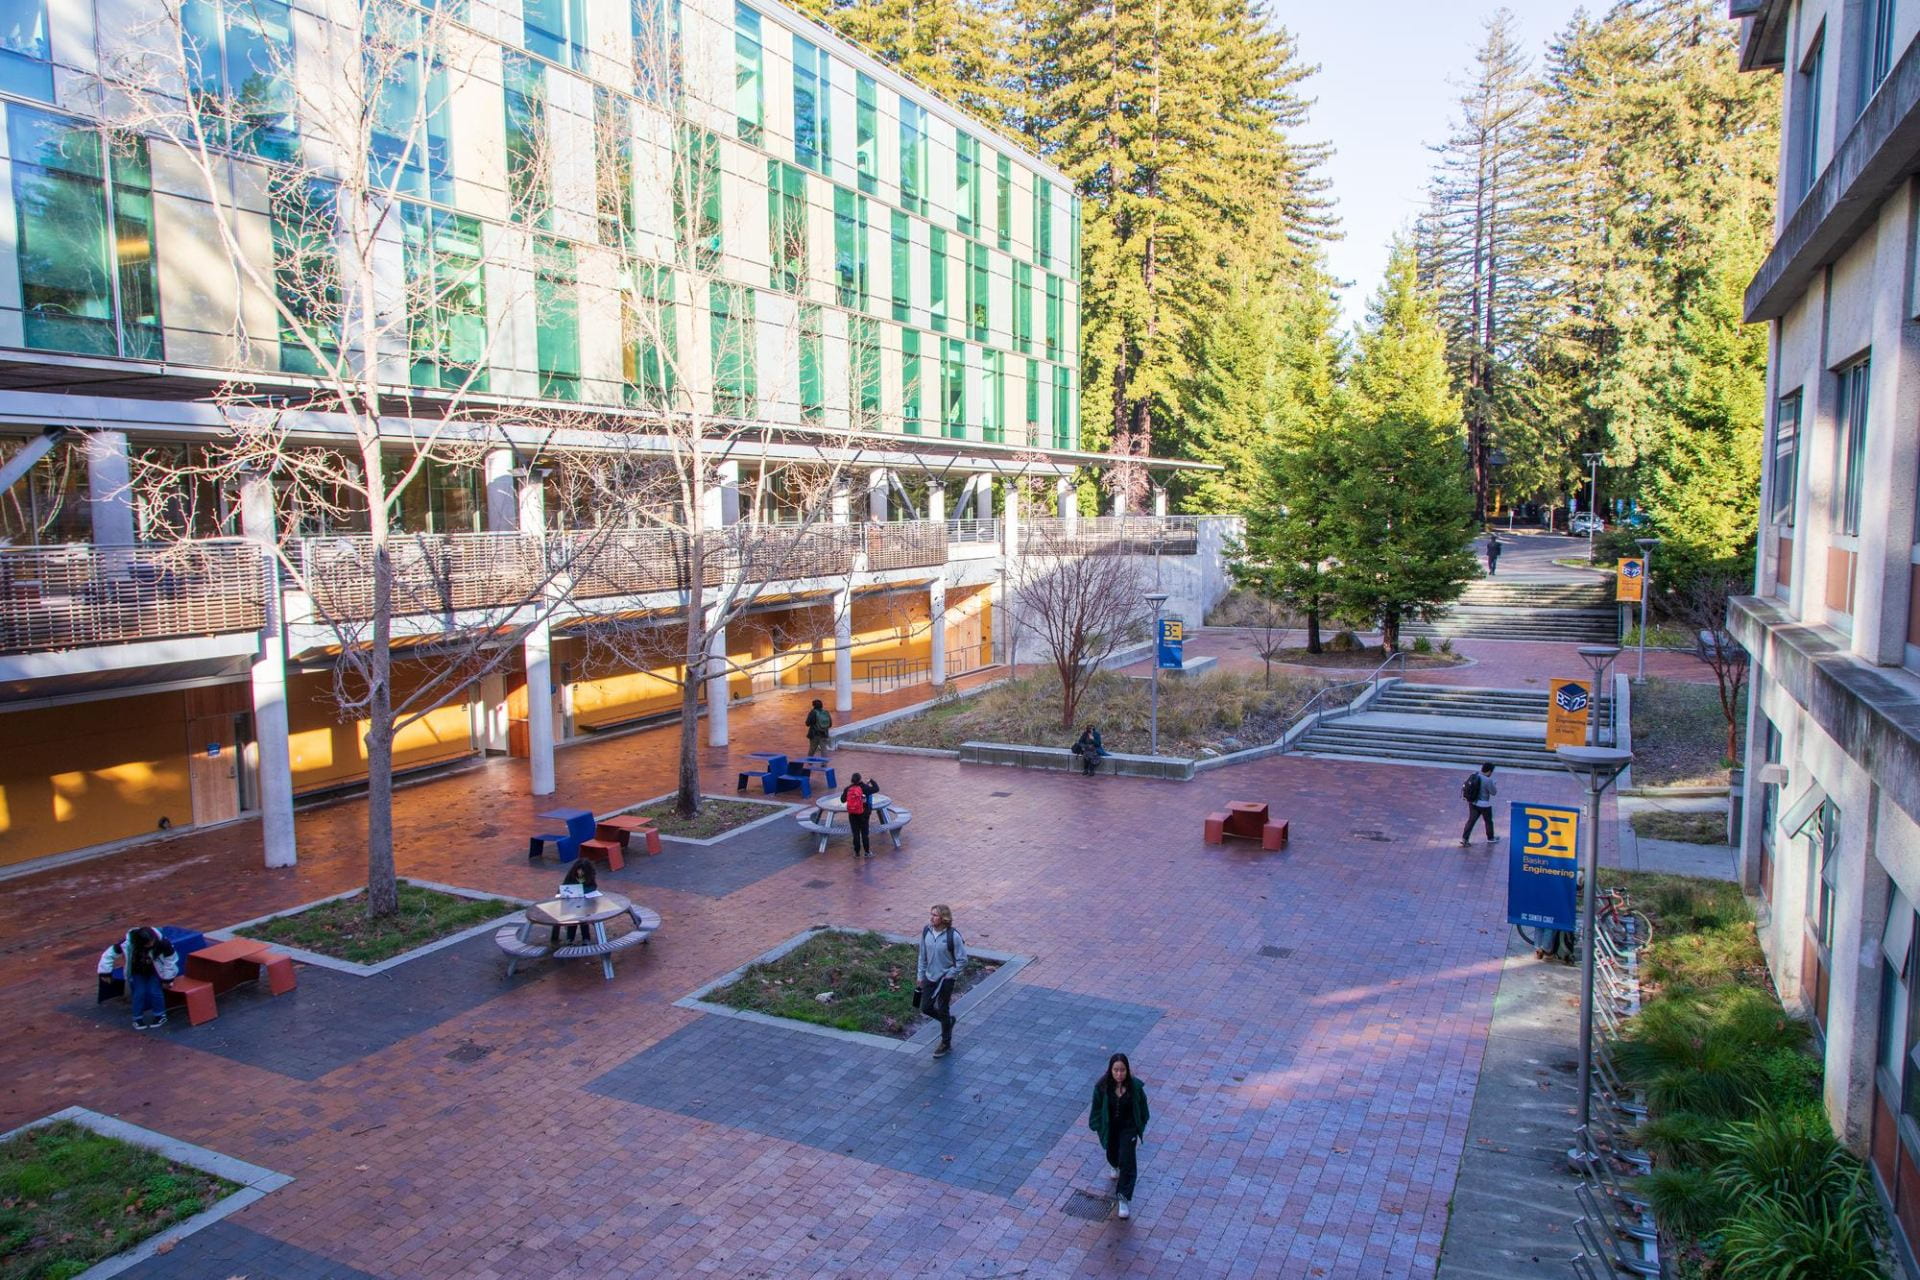 Baskin Engineering Building at UCSC, view of the courtyard with people walking, decorative image.